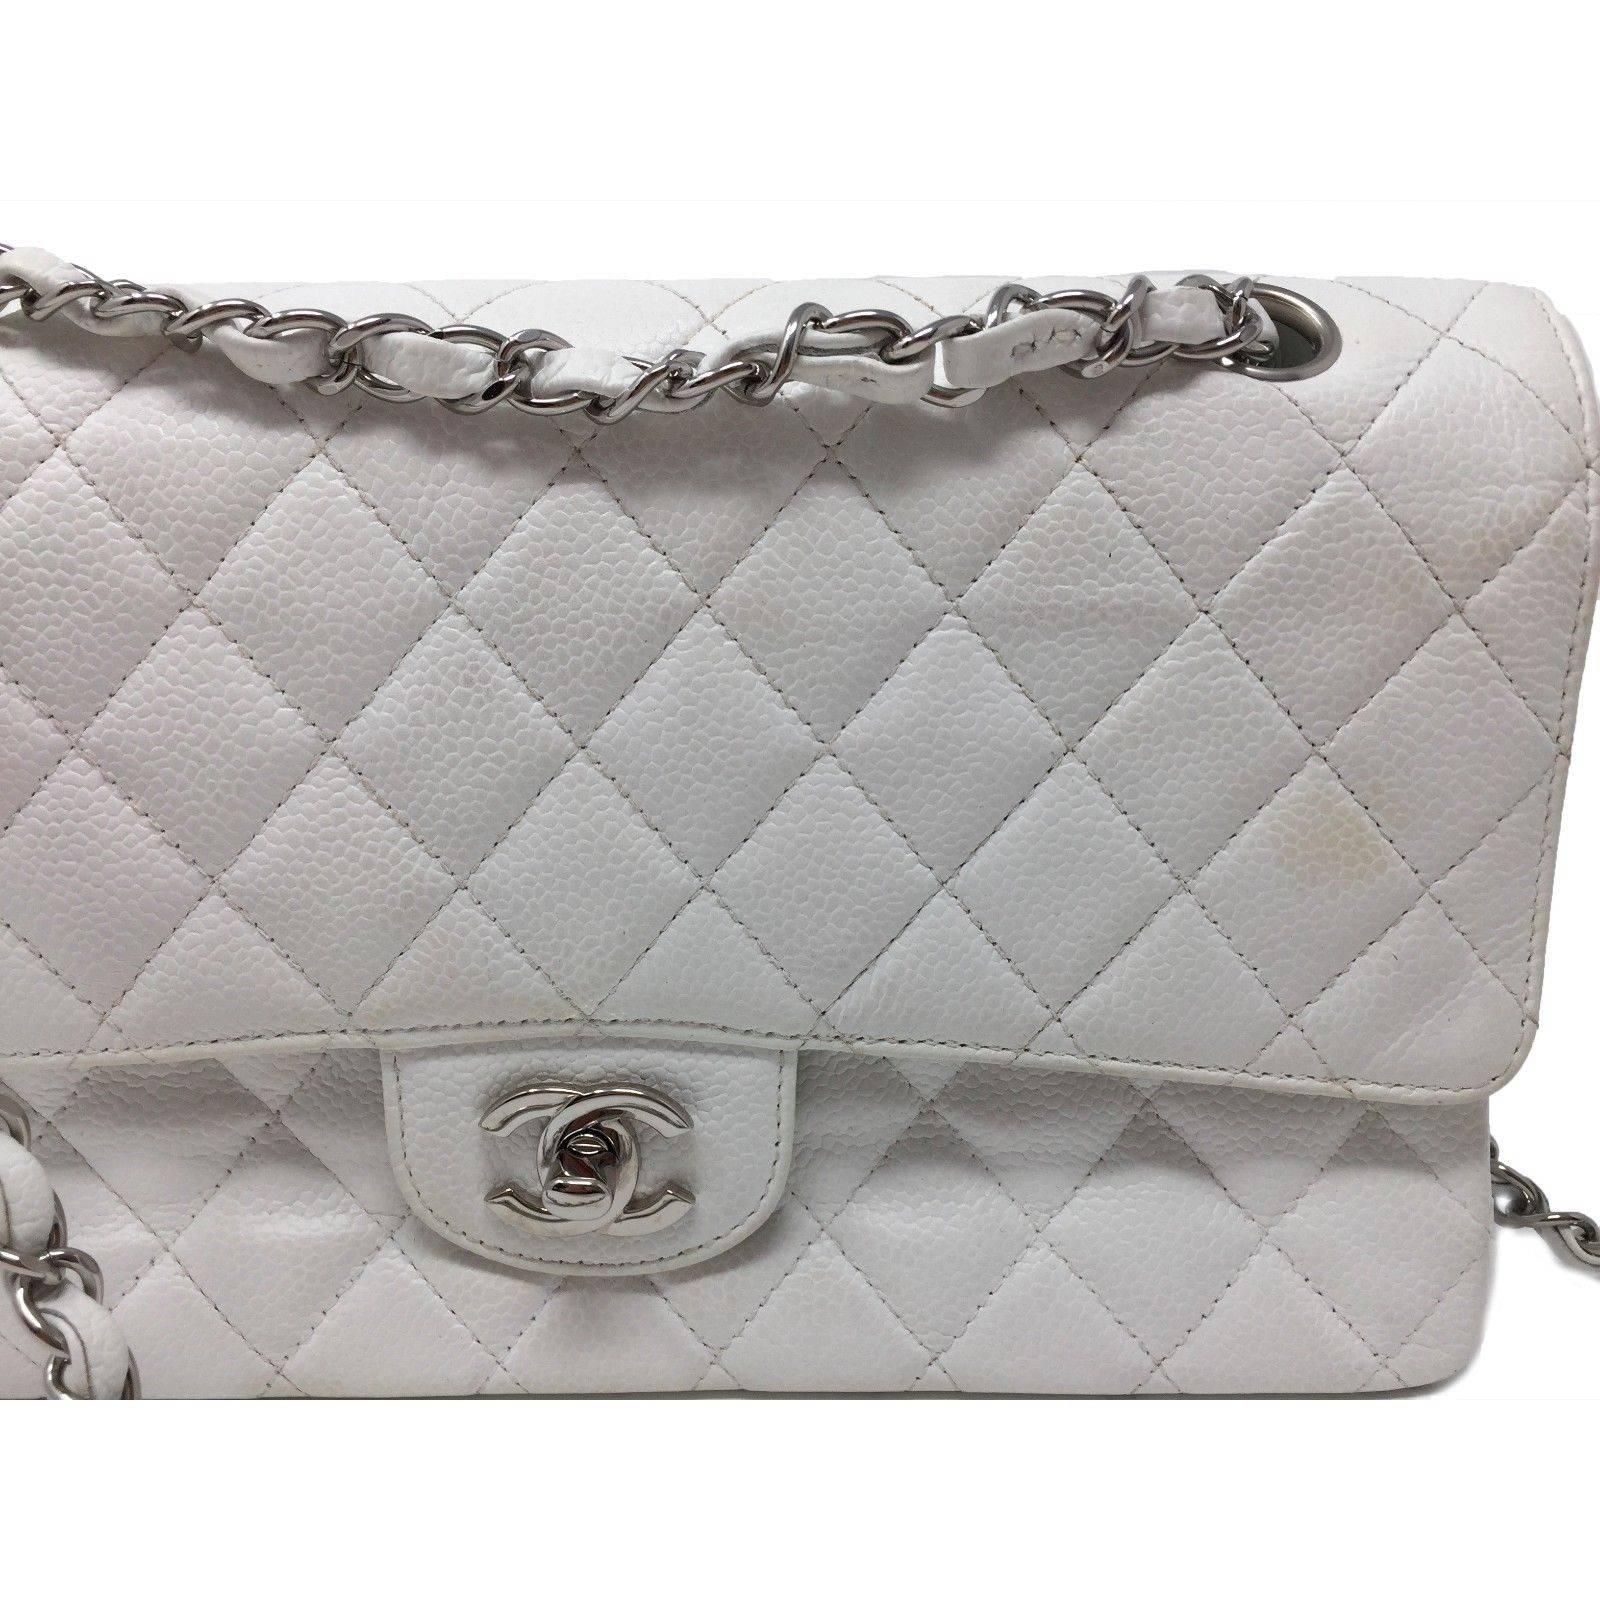 Chanel Classic Double Flap Bag Caviar White Quilted Leather Medium For Sale 6